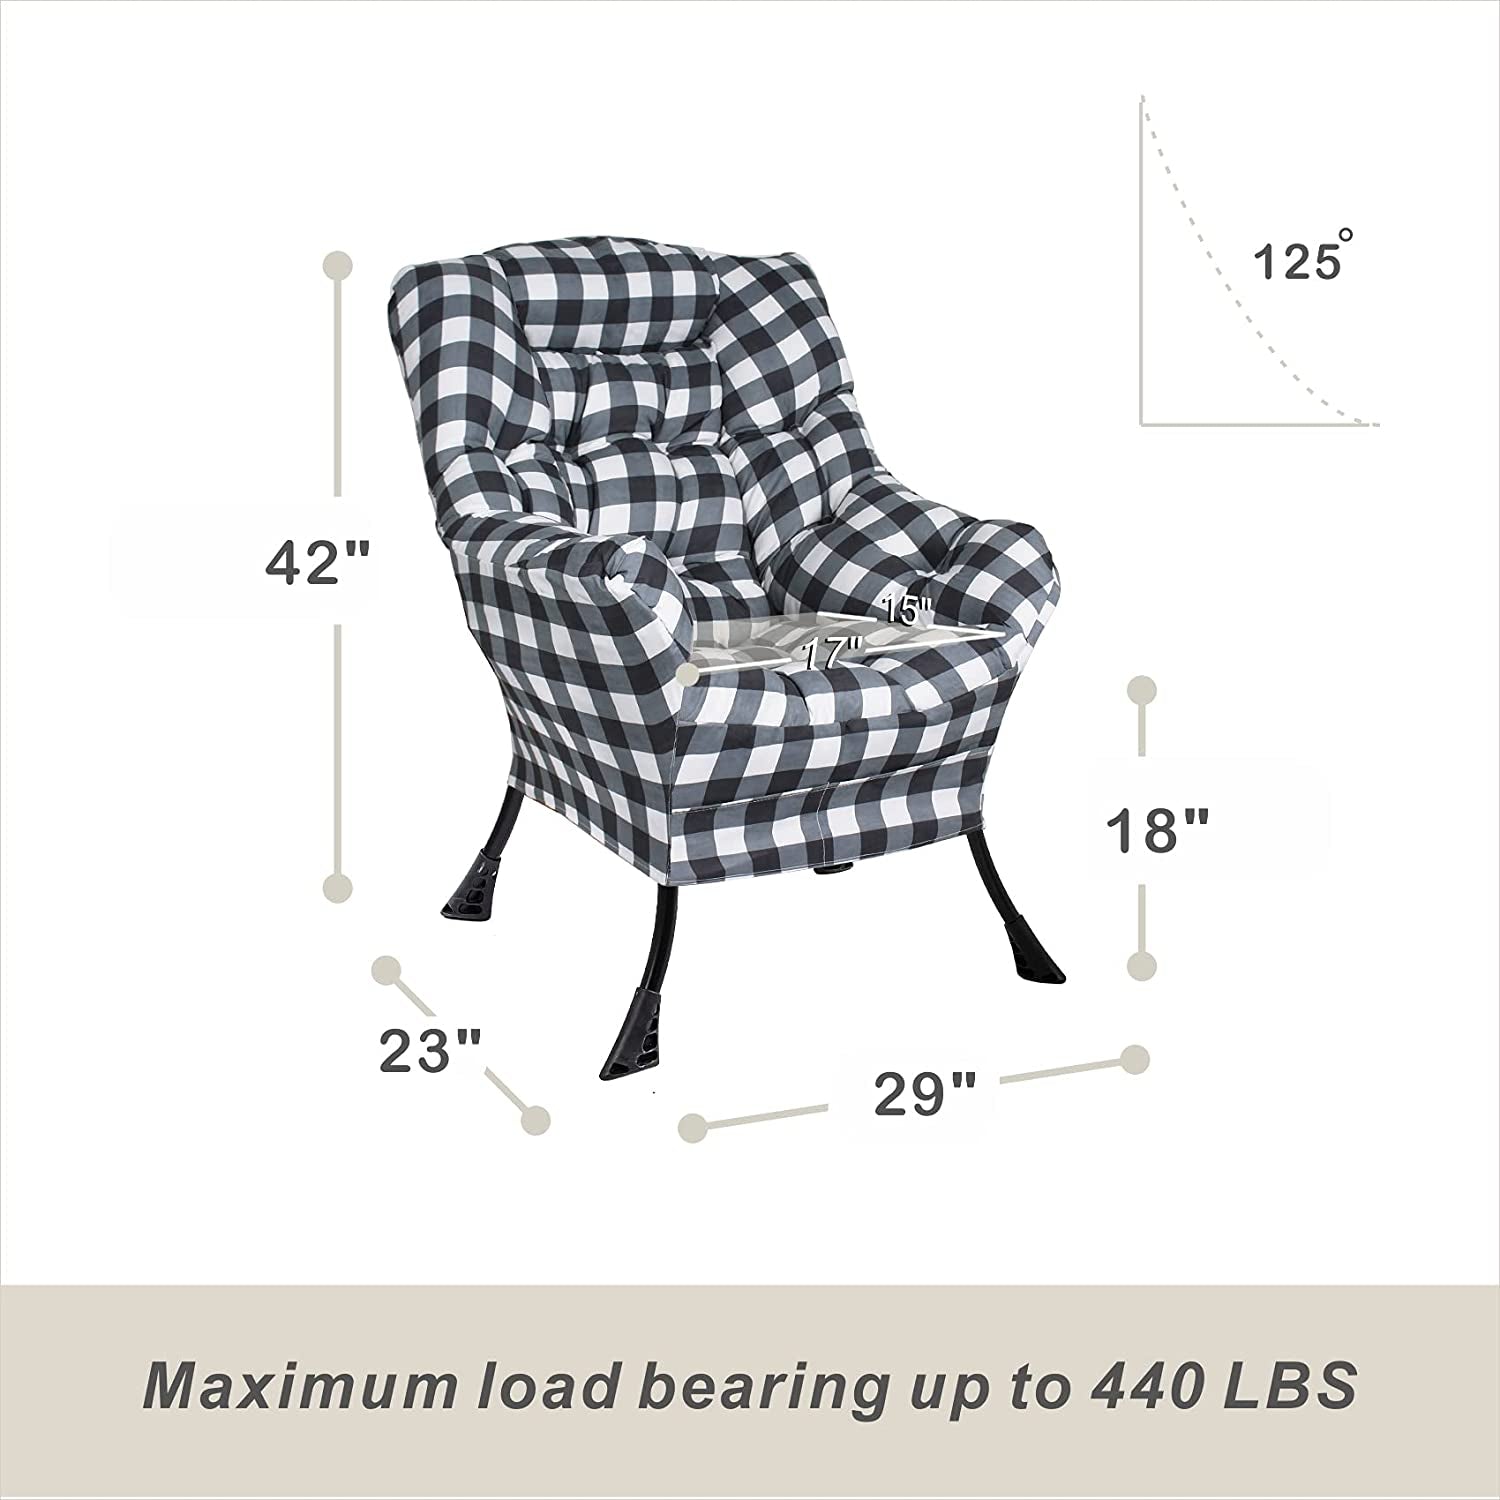 Living Room Single High Back Lazy Chair Modern Upholstered Accent Chair (Checker Grey)